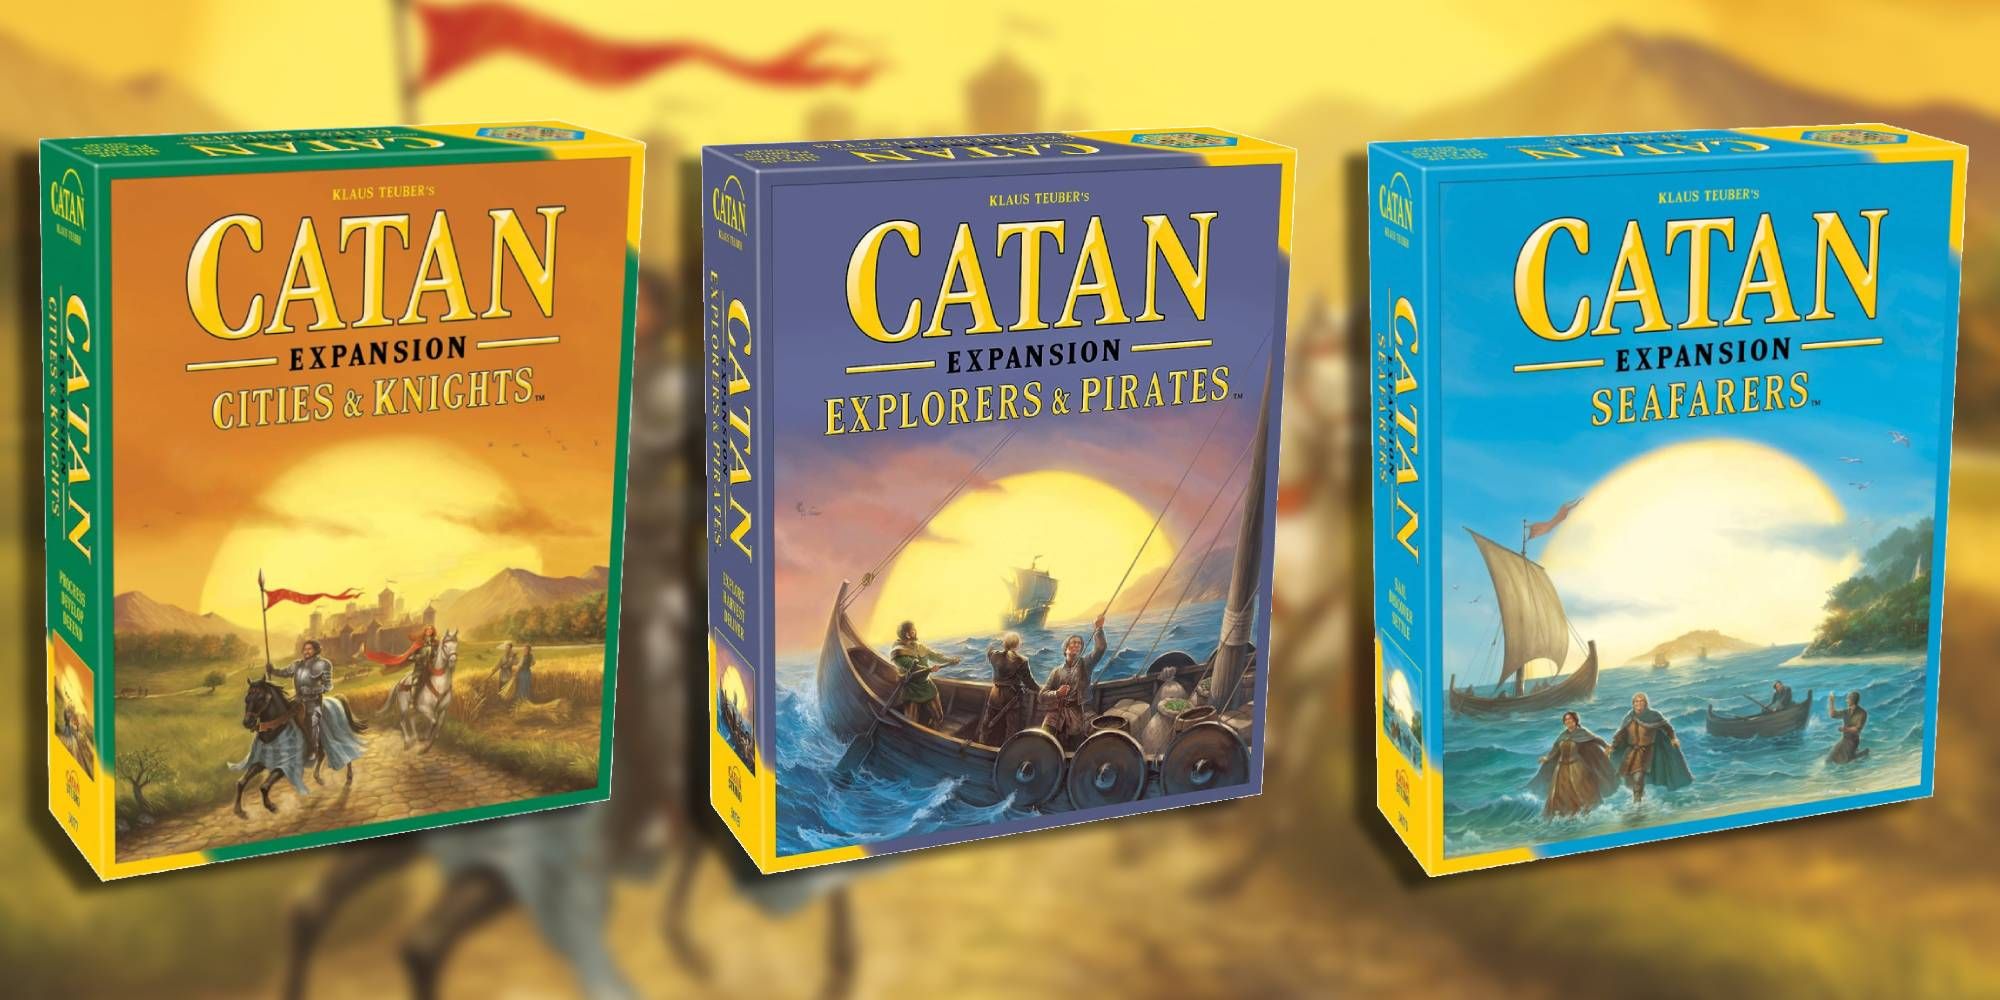 Catan Feature Image with Expansions